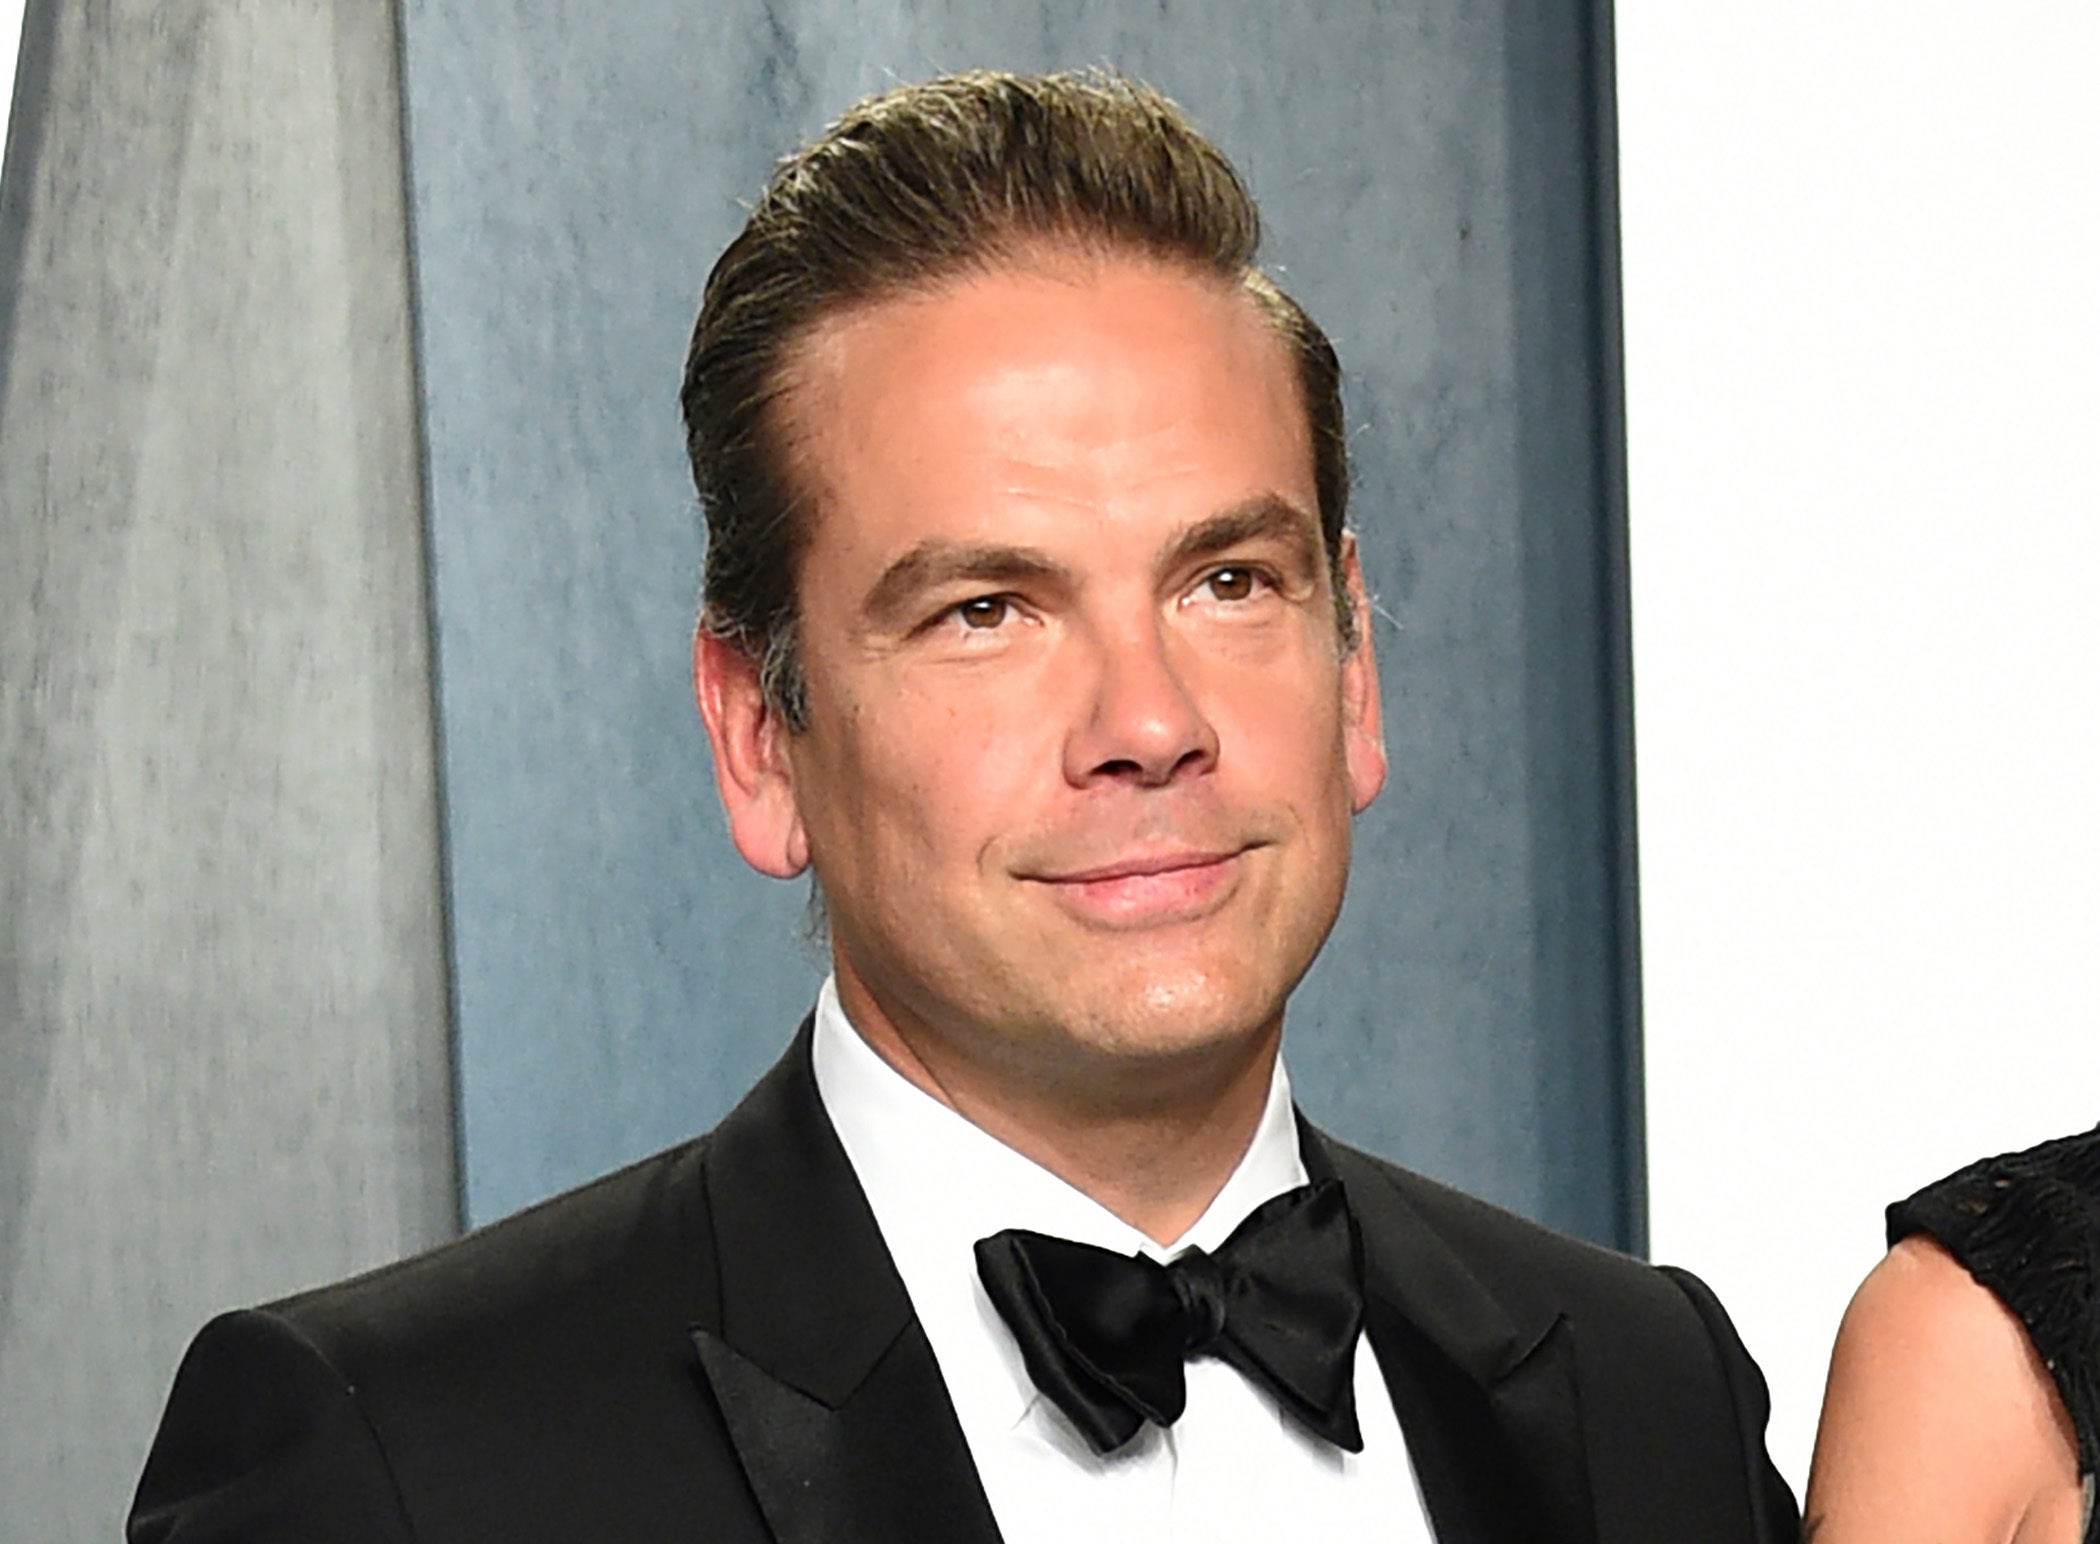 Lachlan Murdoch is taking over at a difficult time for Fox News